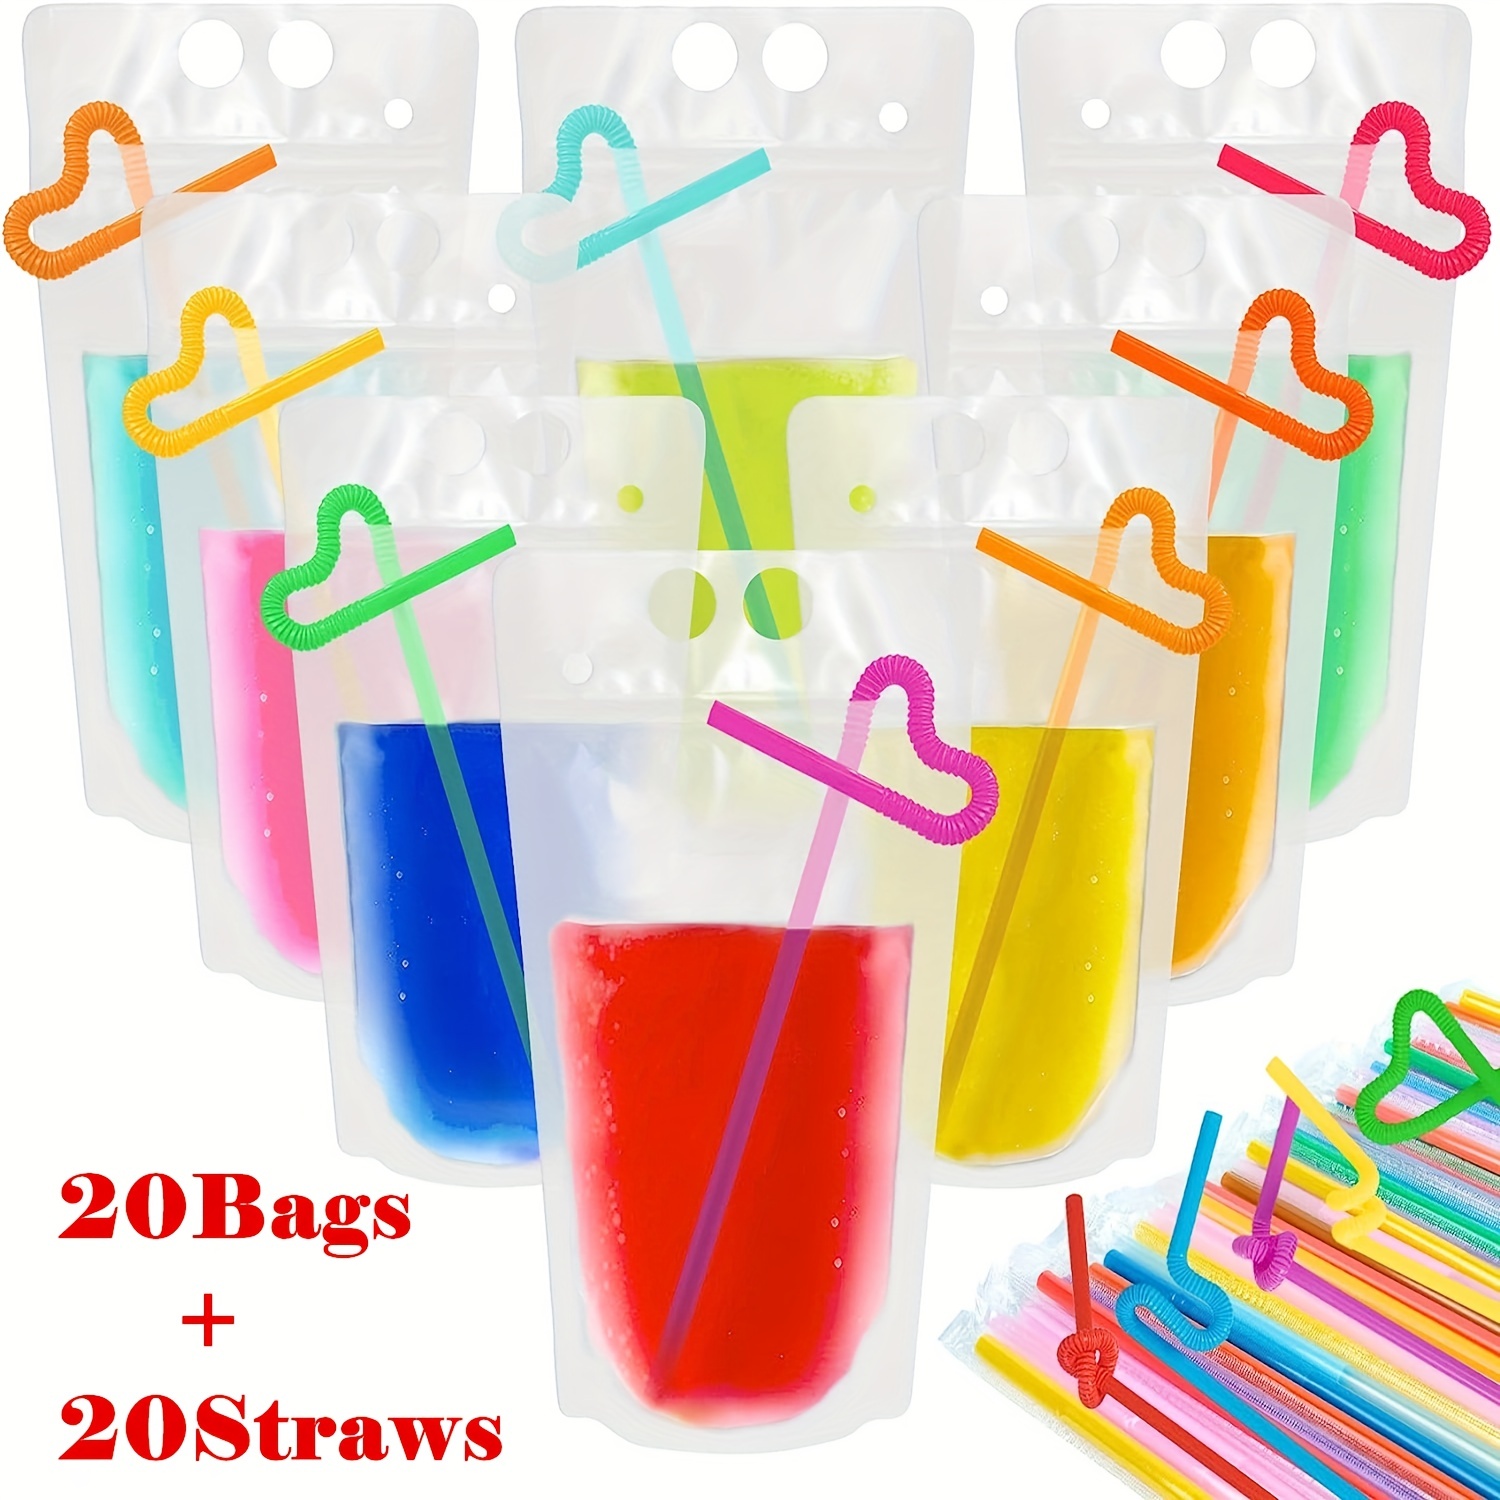 Drink Pouches for Adults: Juice Pouches | 80 Pcs Heavy Duty Hand-Held Translucent Frosted Reclosable Stand-up Zipper Plastic Smoothie Drink Bags